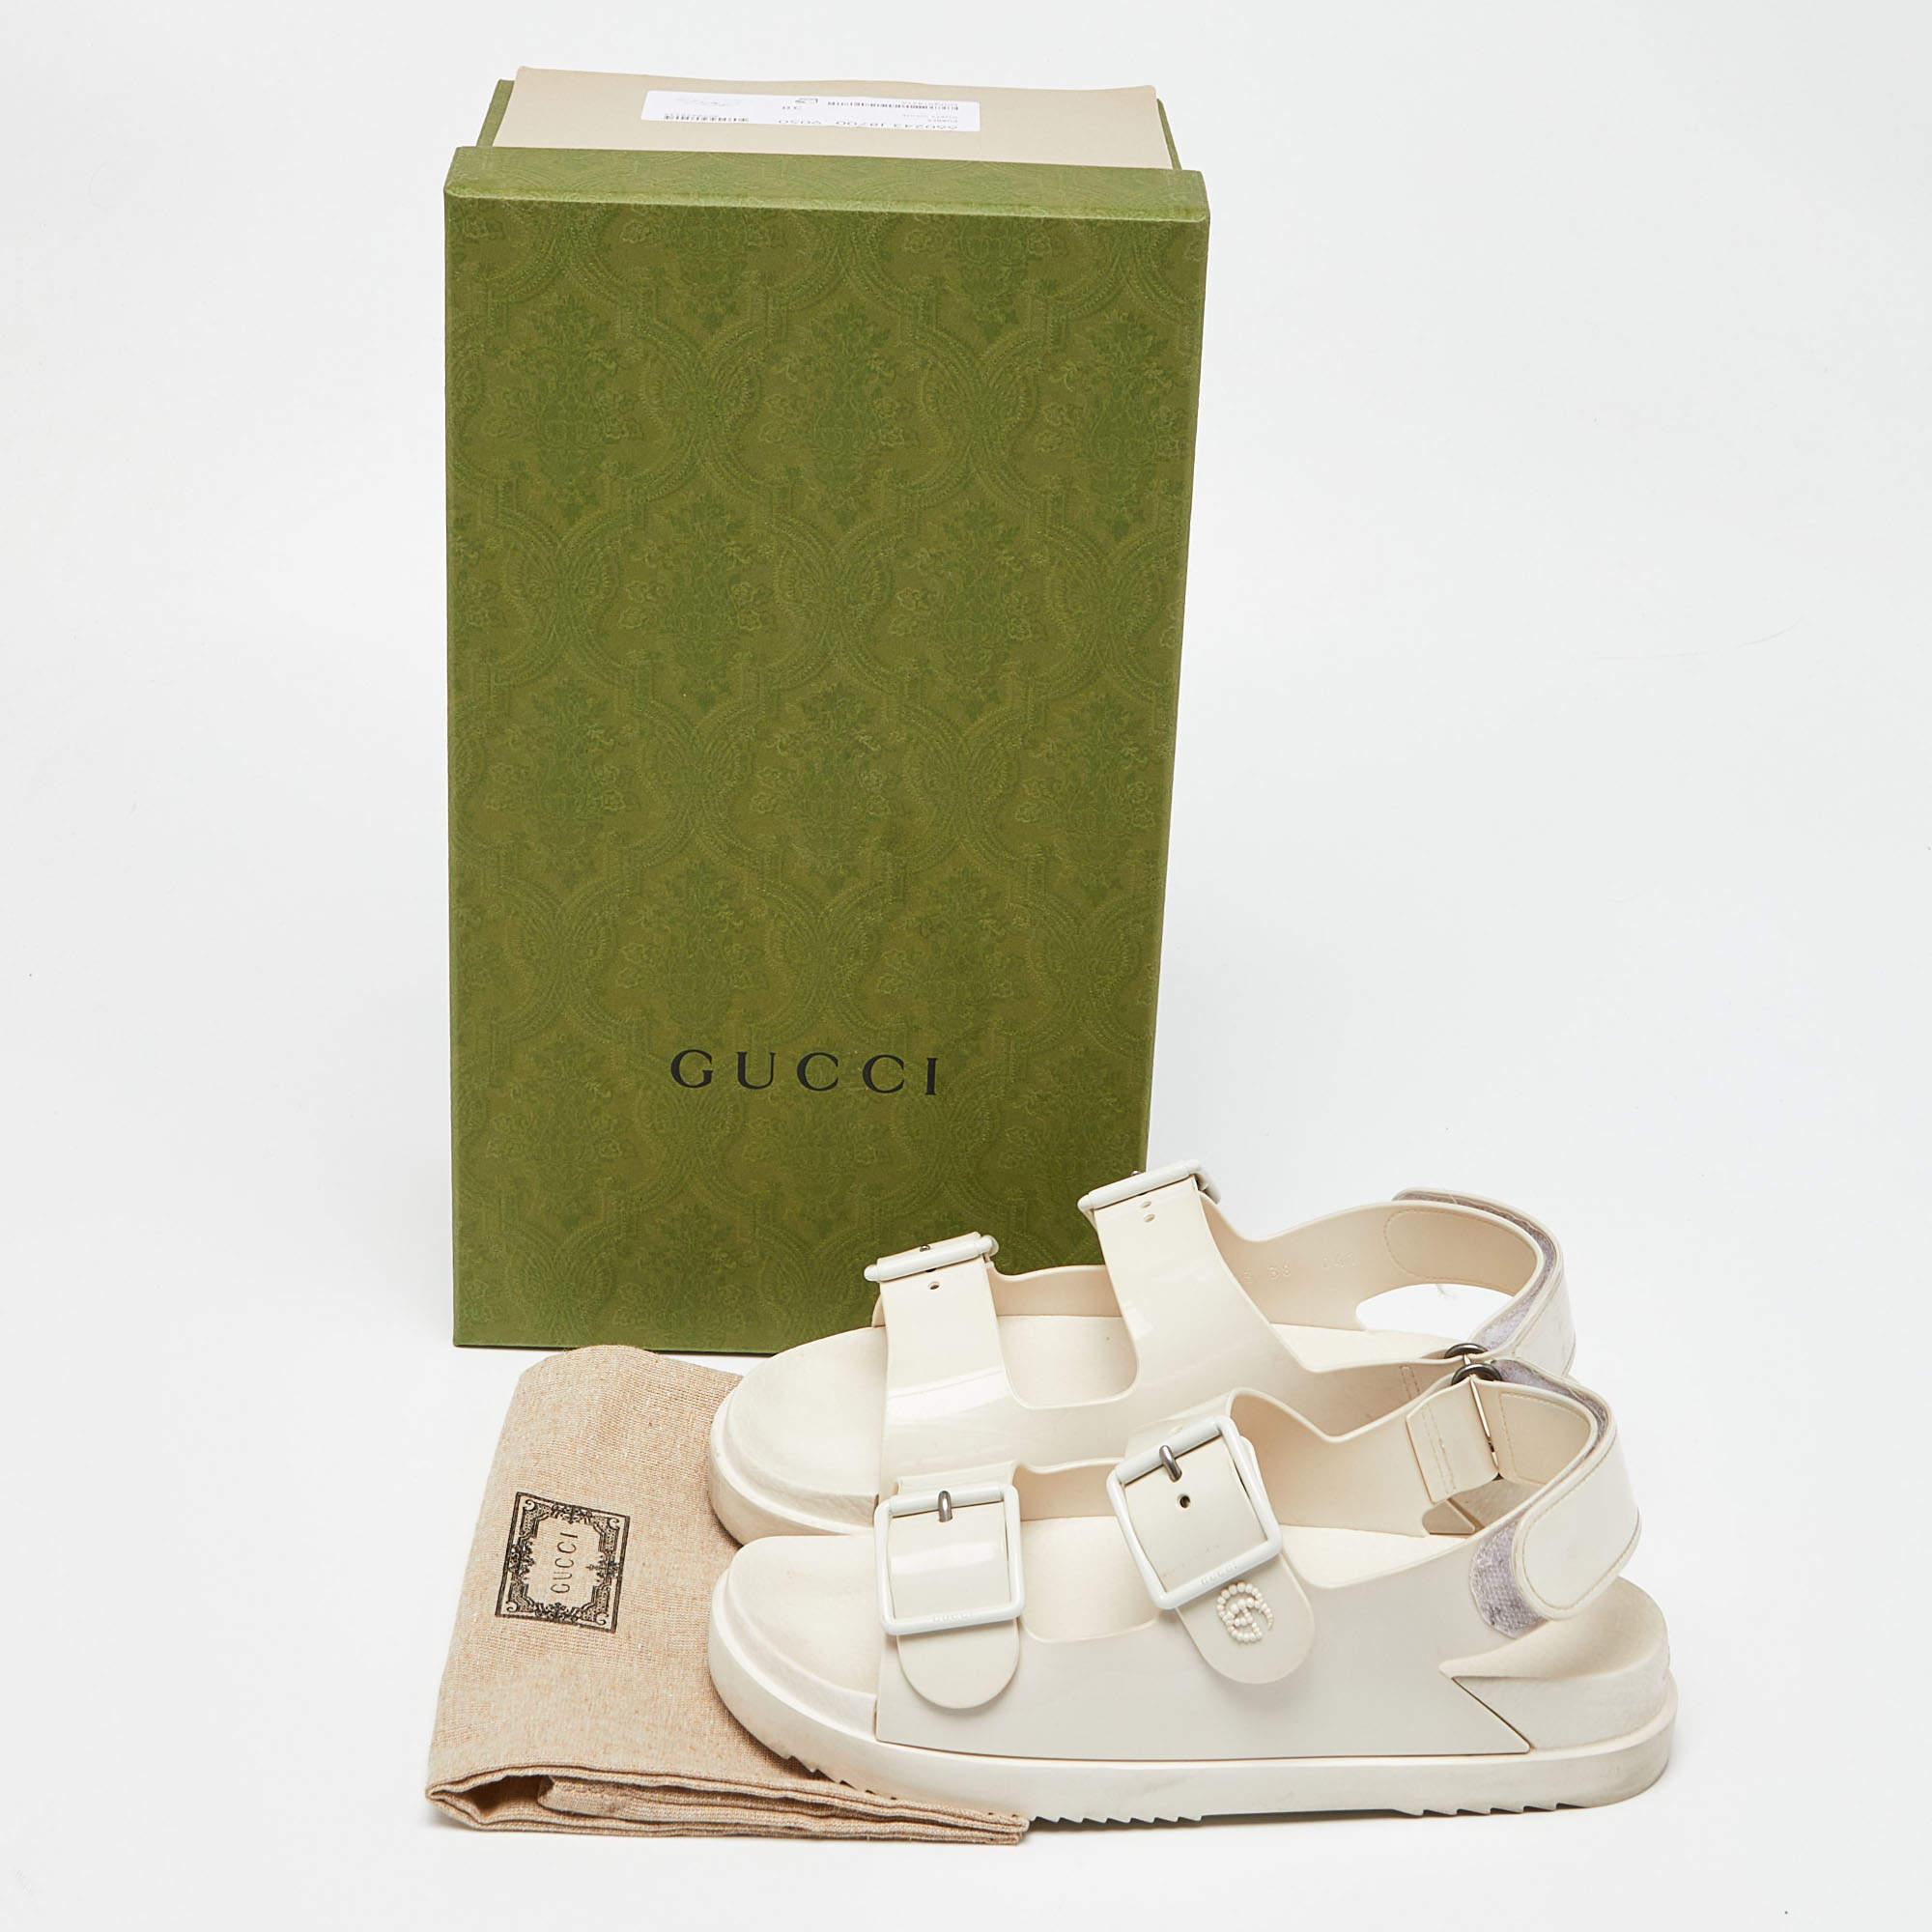 Gucci Off White Rubber Mini Double G Logo Dusty Ankle Strap Flat Sandals Size 38 7